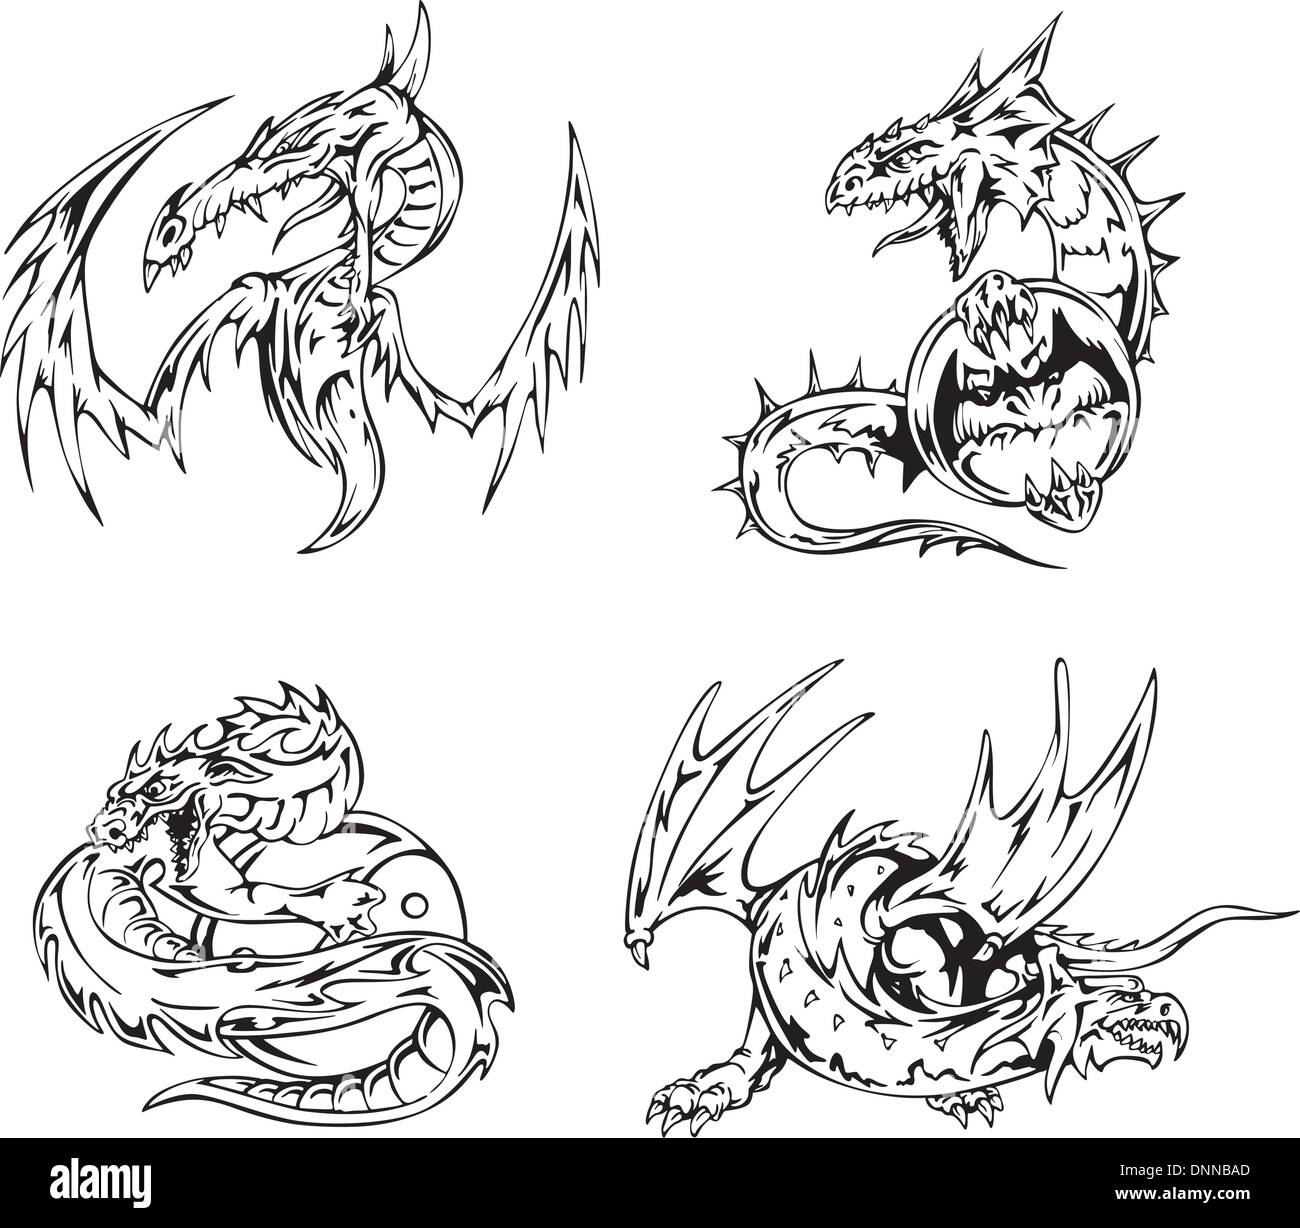 Dragon tattoos. Set of black and white vector illustrations. Stock Vector